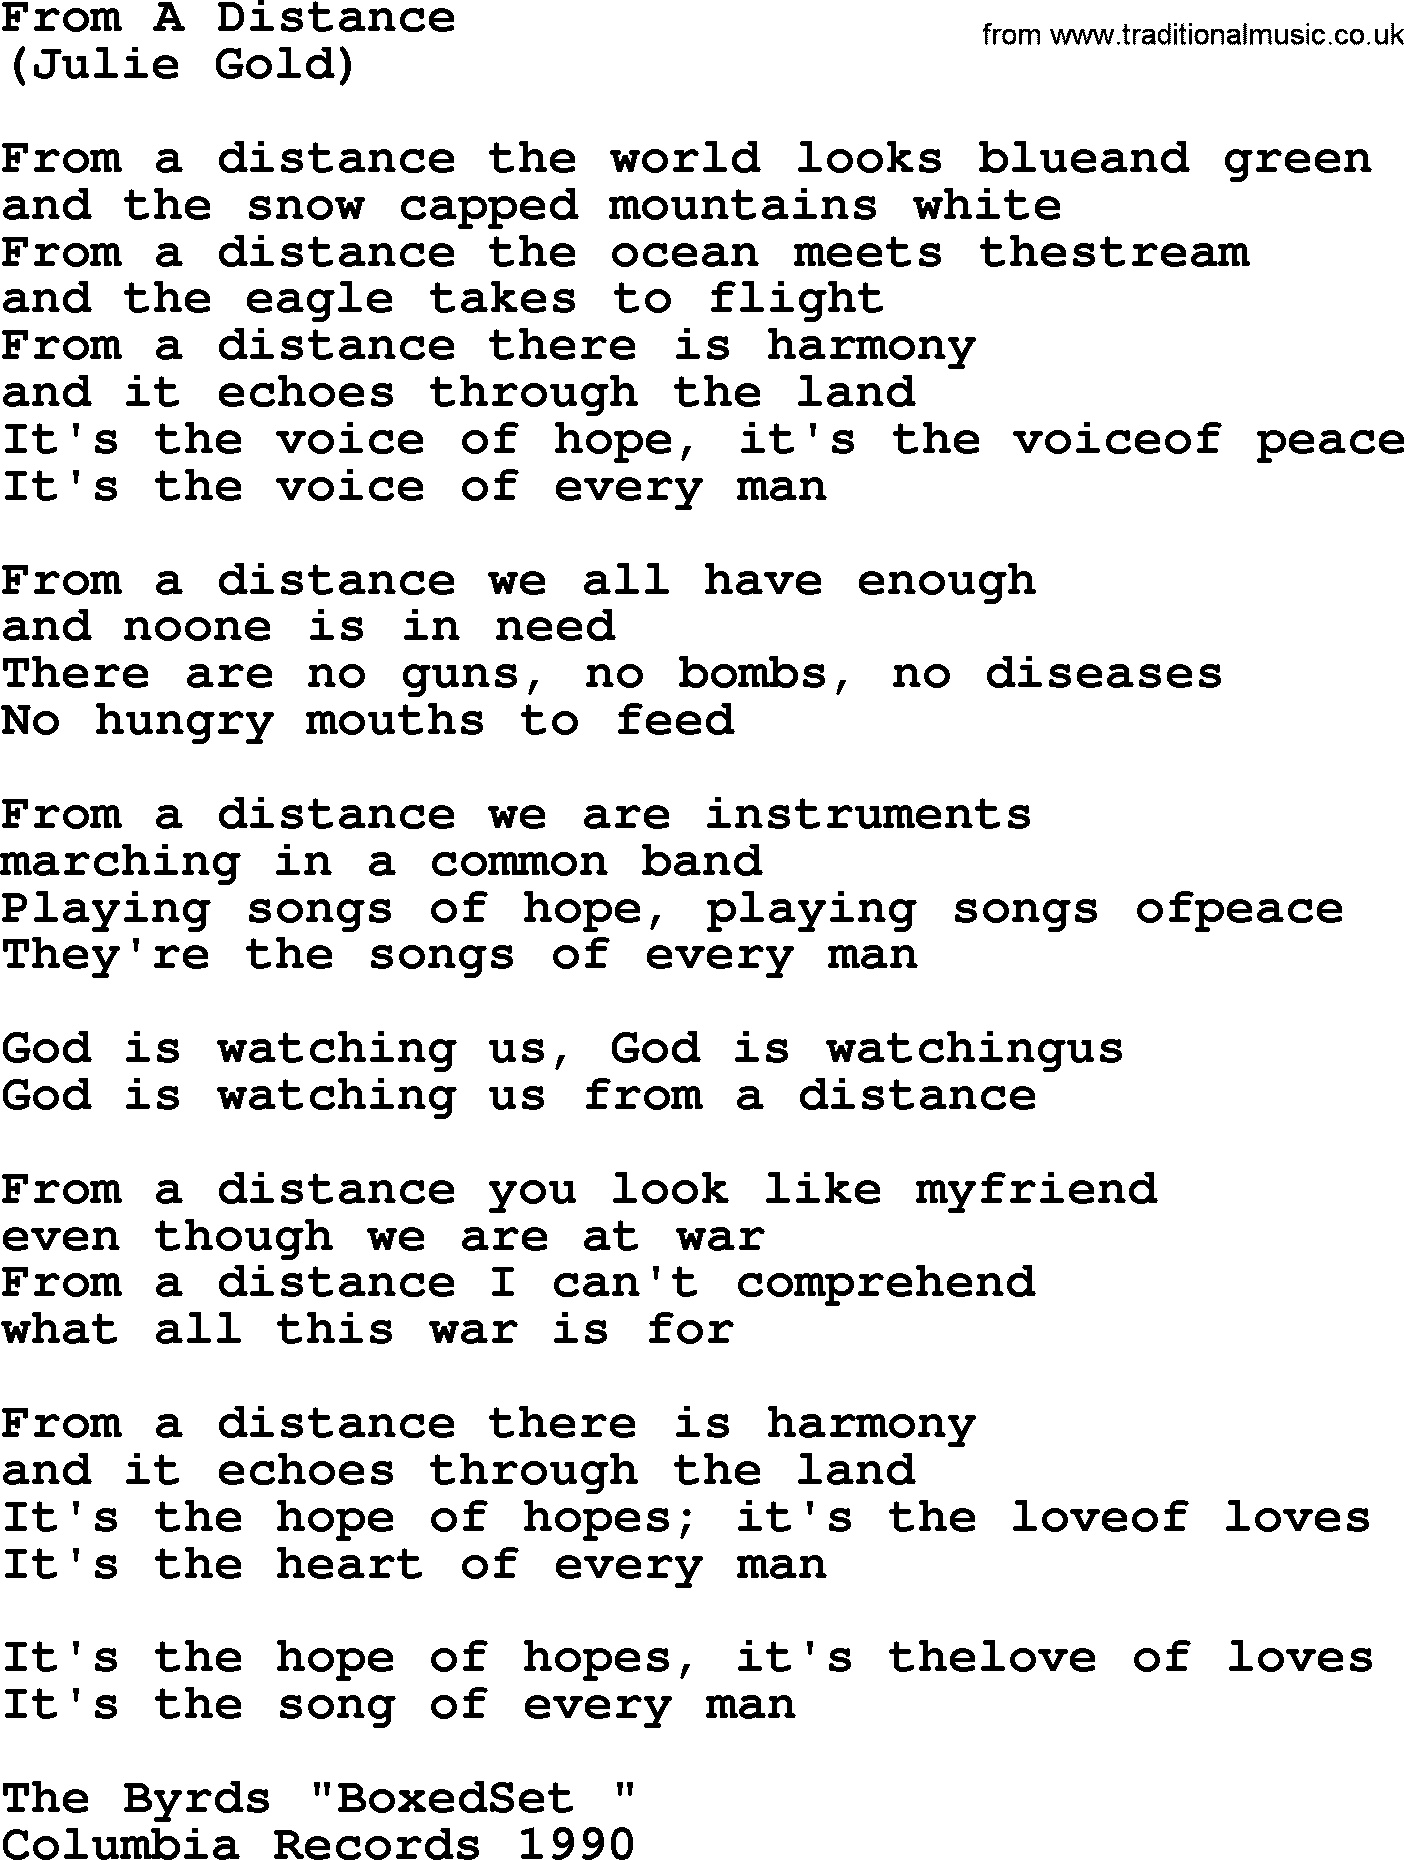 The Byrds song From A Distance, lyrics